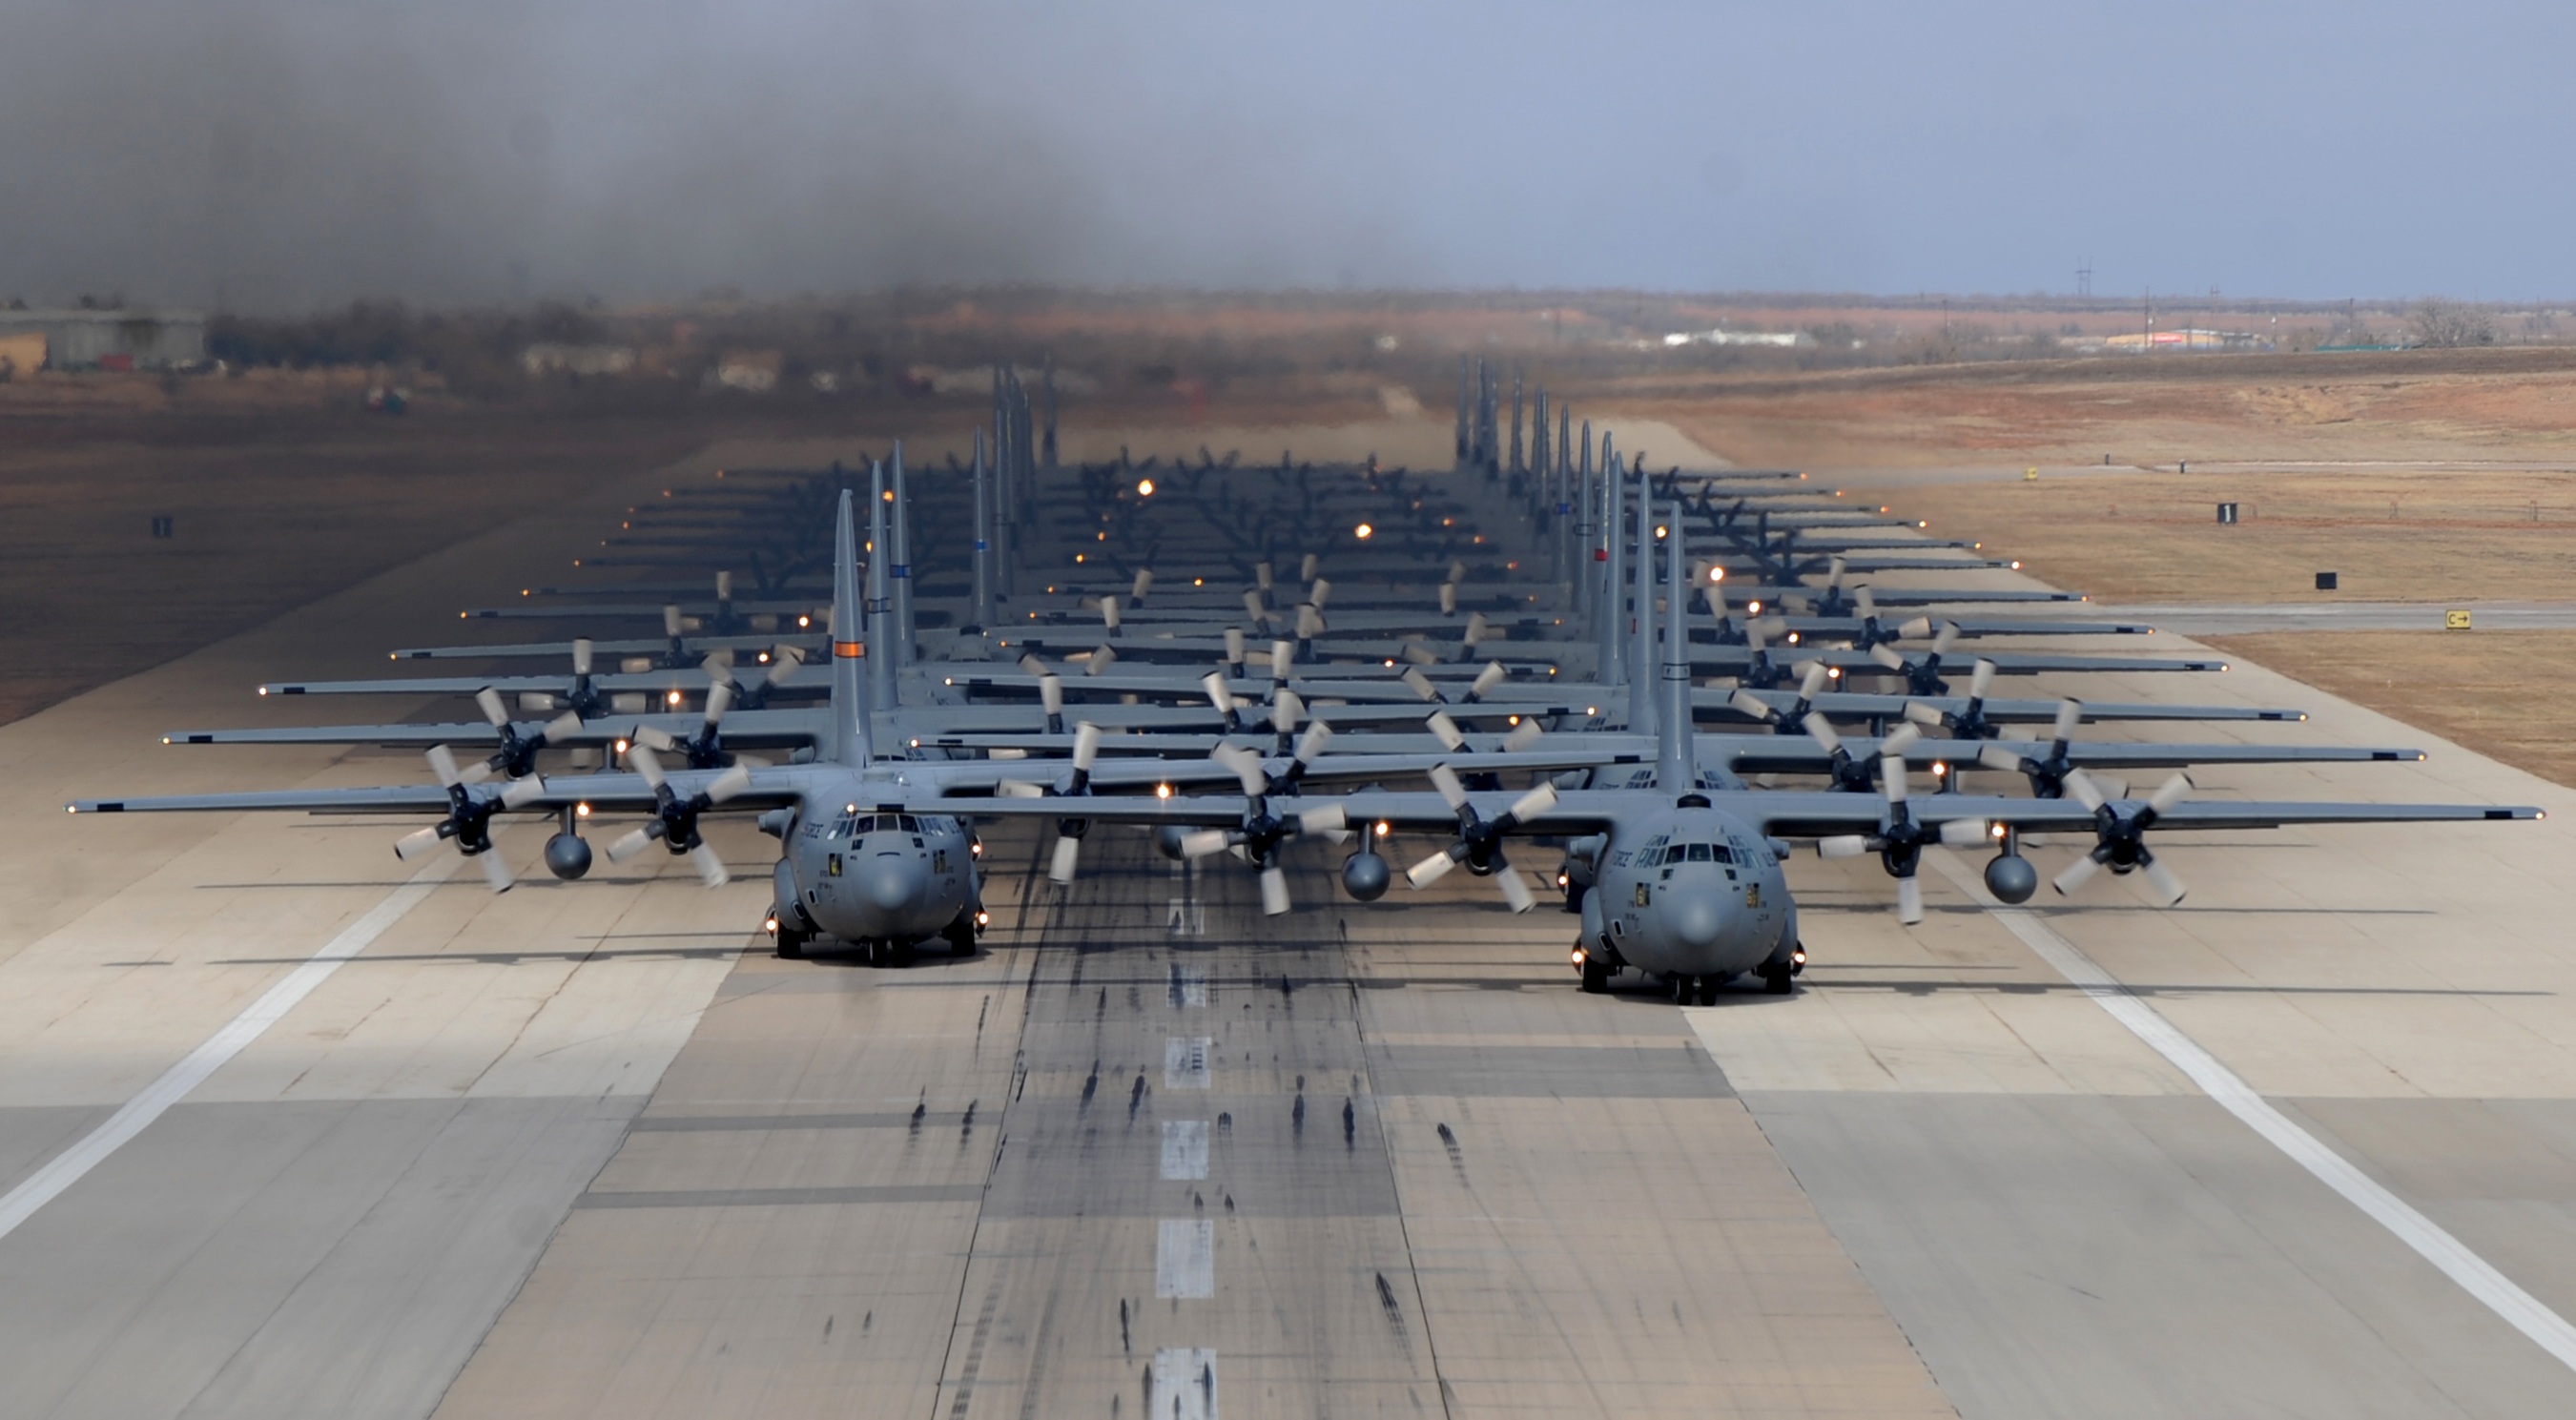 Military aircrafts on the runway photo